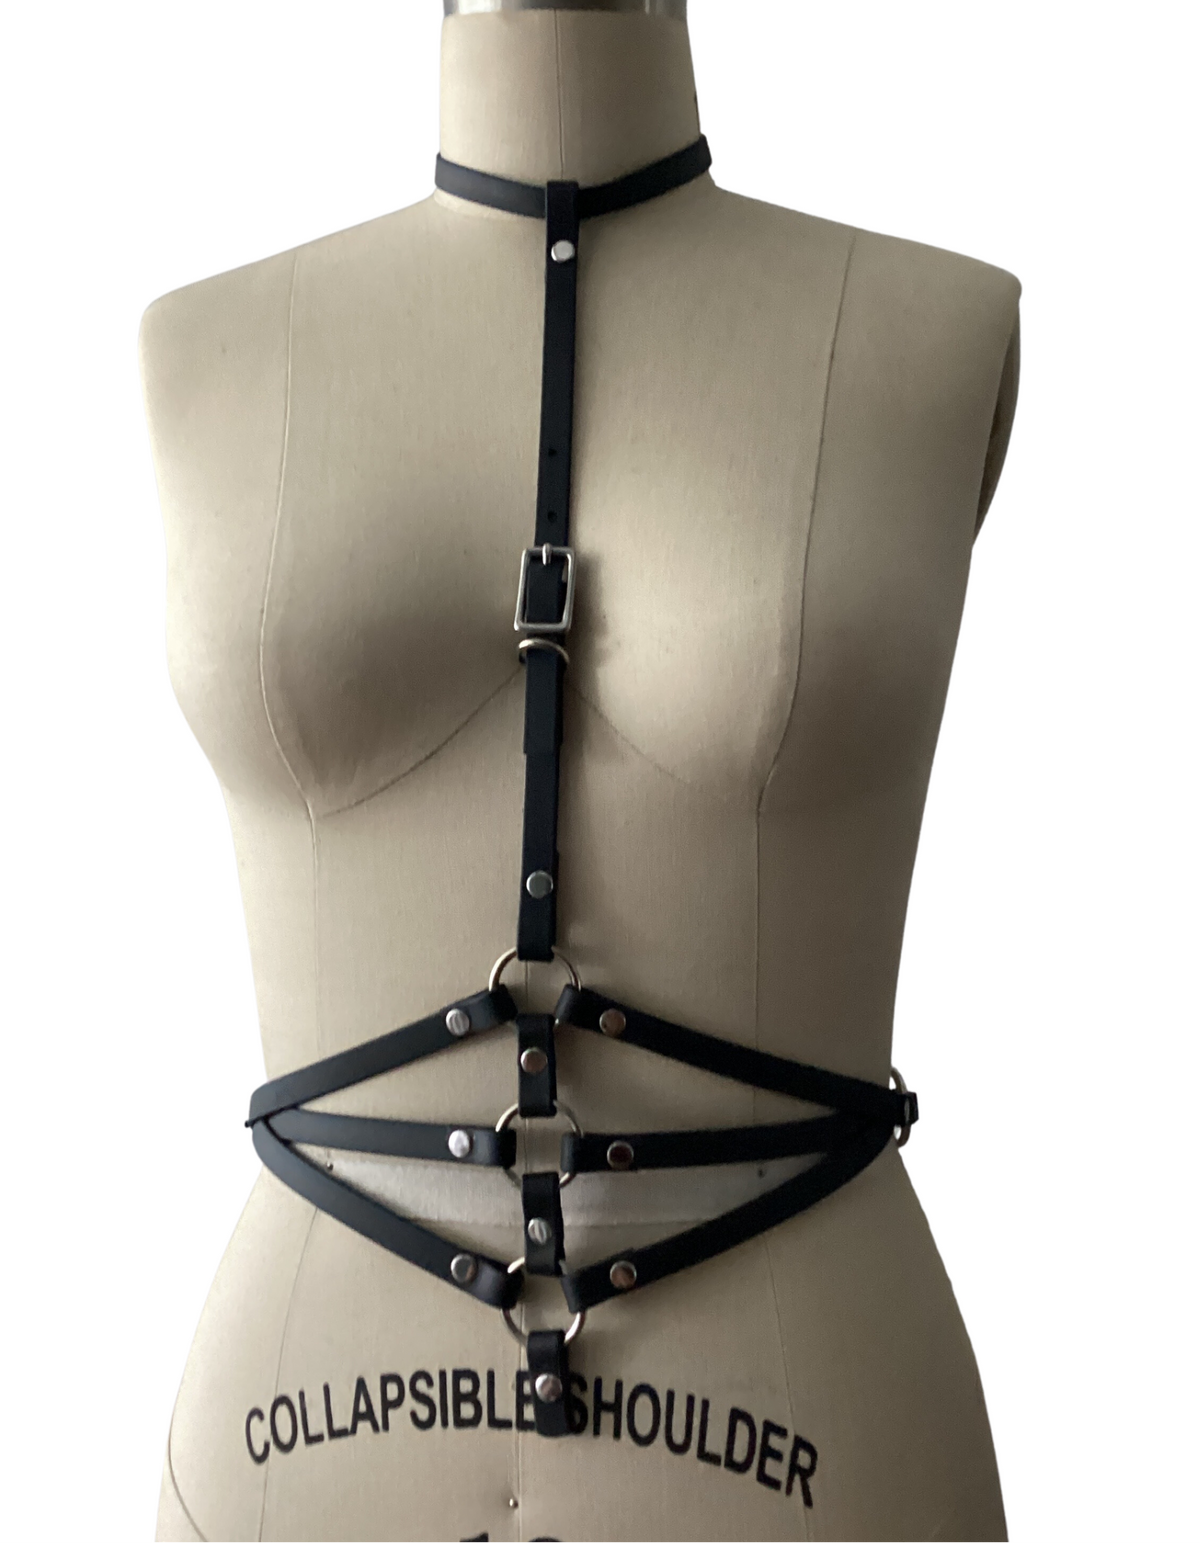 Black harness top outfit for any occasion shown on a mannequin against a white background.